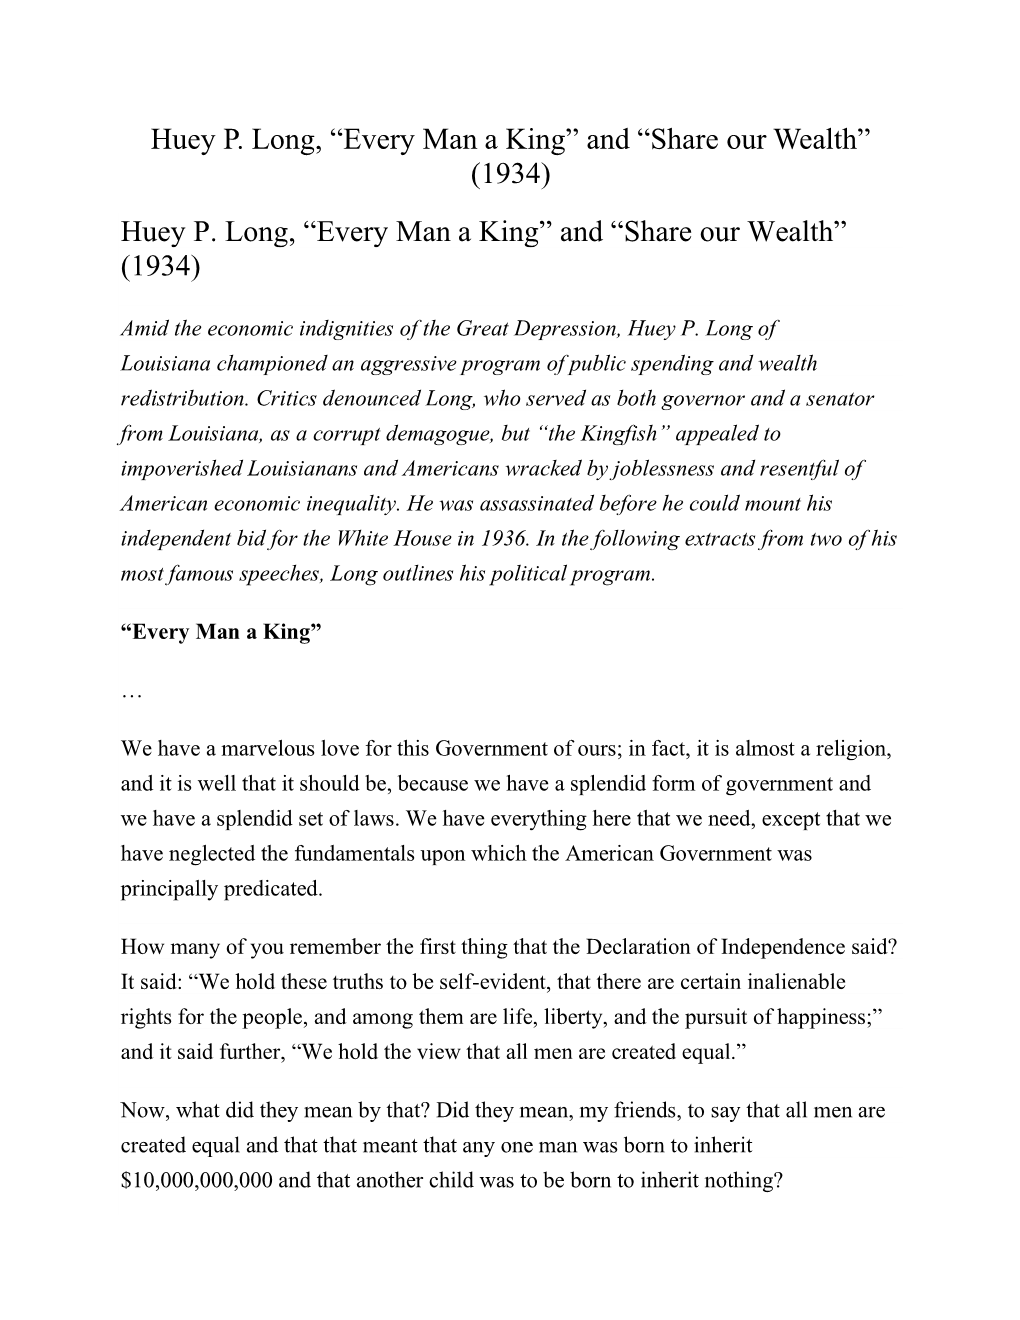 Huey P. Long, “Every Man a King” and “Share Our Wealth” (1934) Huey P